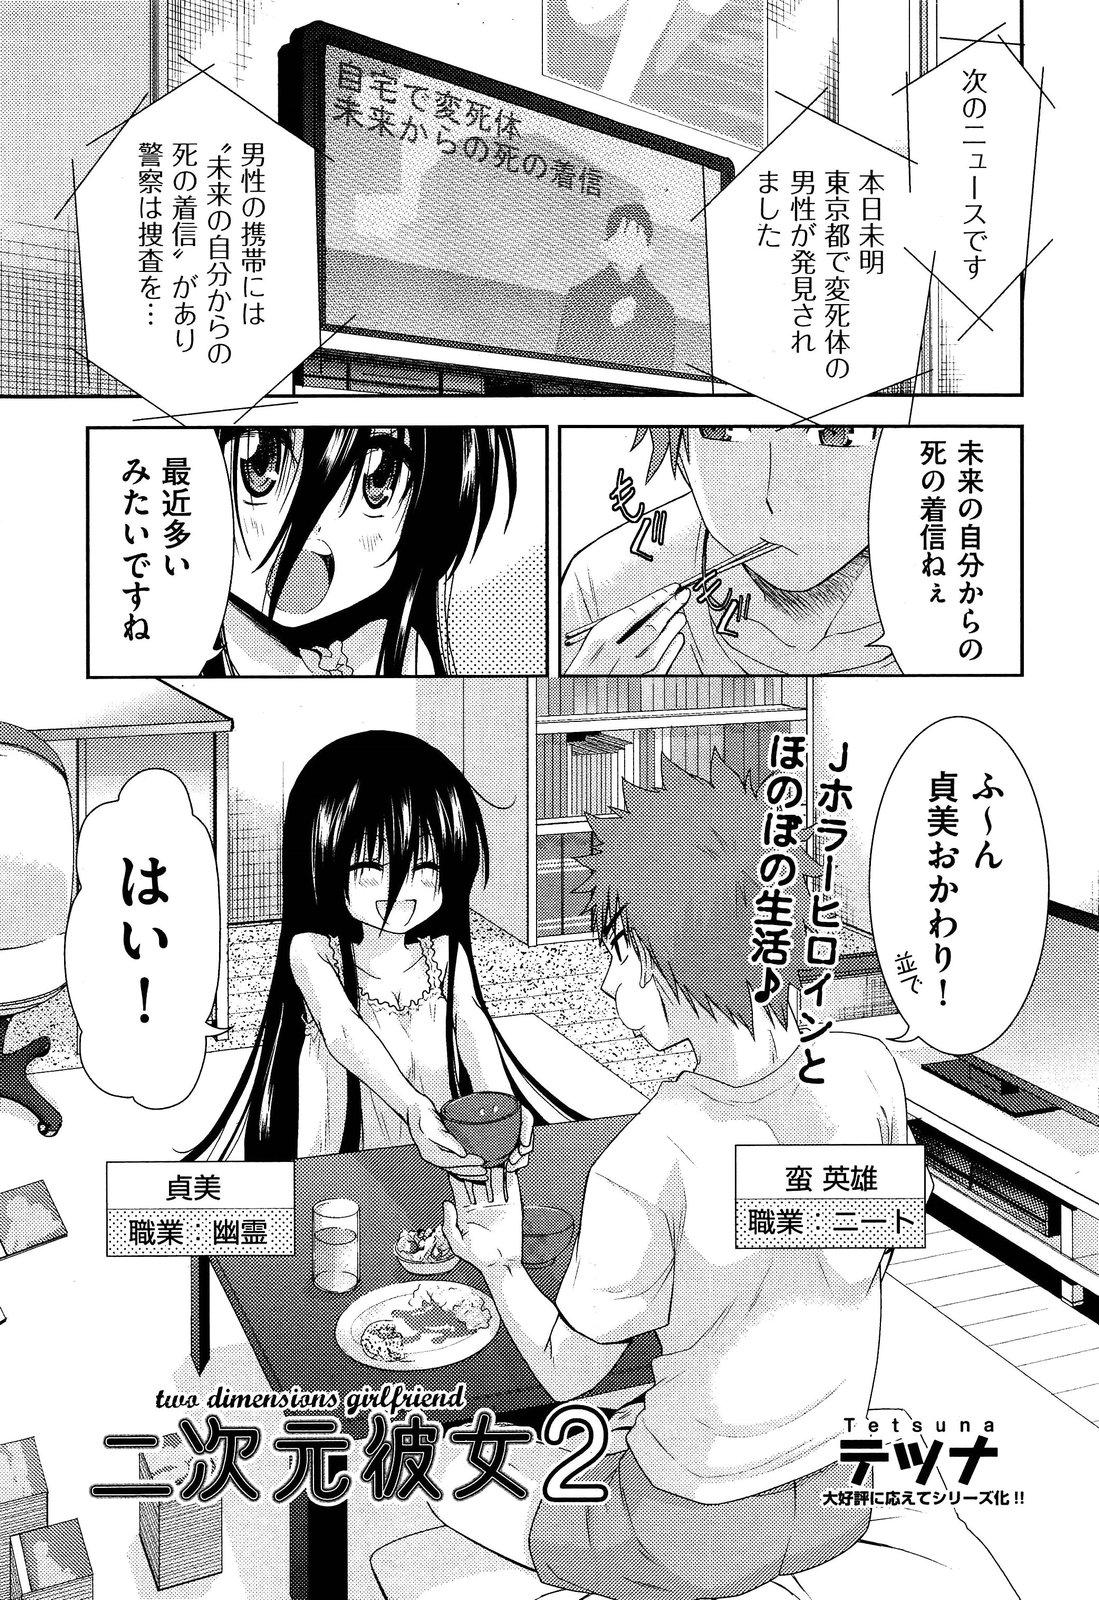 Two dimensions girlfriend Ch.1-4 24